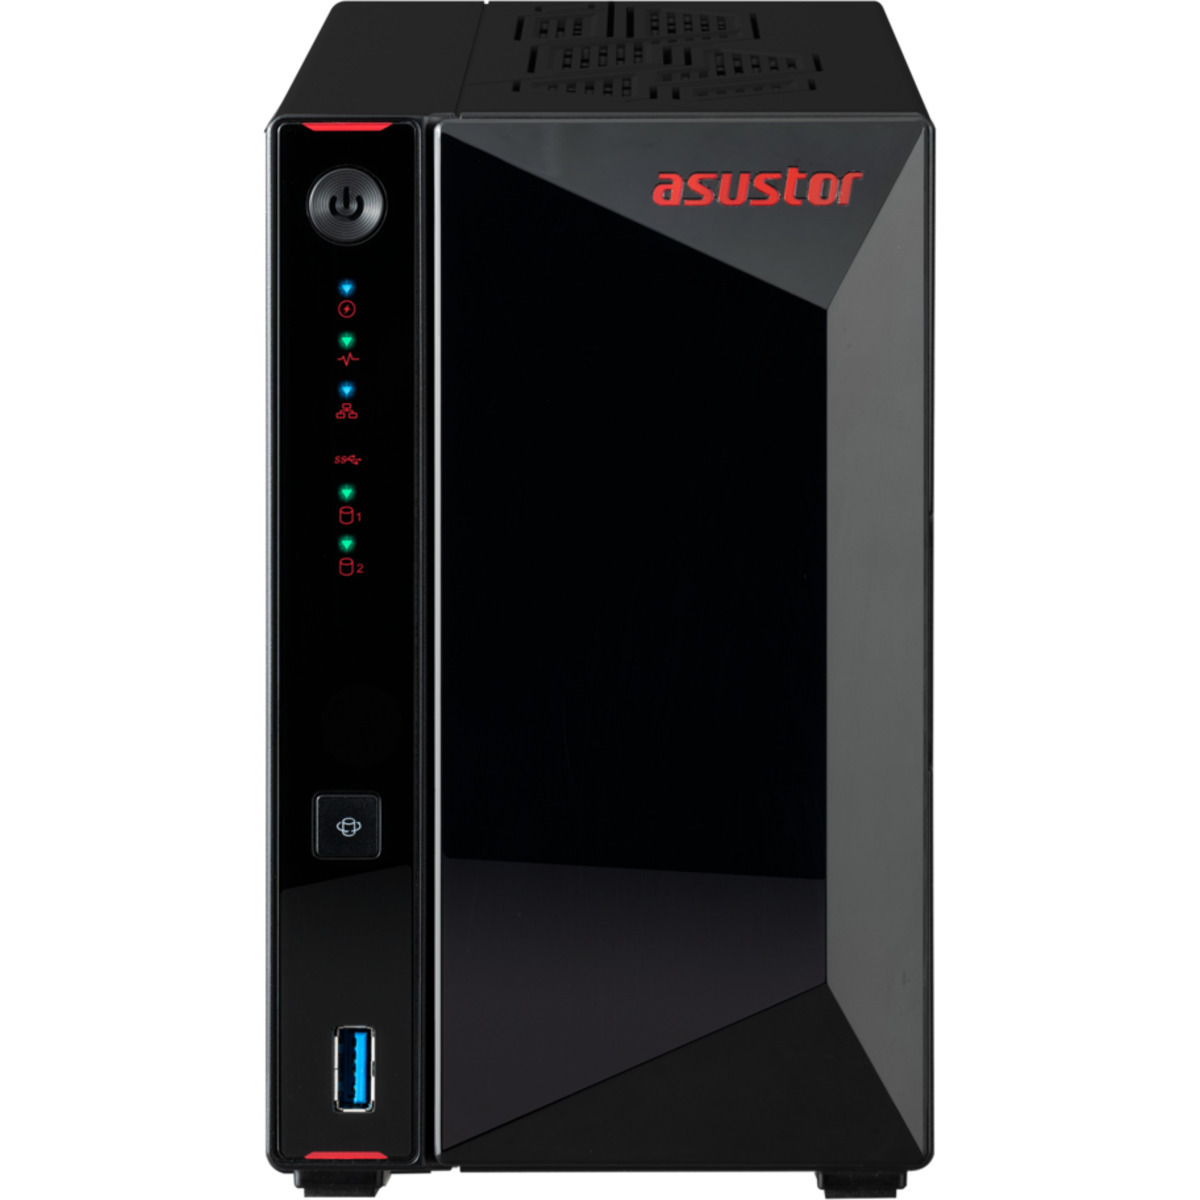 ASUSTOR Nimbustor 2 Gen2 AS5402T 12tb 2-Bay Desktop Multimedia / Power User / Business NAS - Network Attached Storage Device 1x12tb Western Digital Red Pro WD121KFBX 3.5 7200rpm SATA 6Gb/s HDD NAS Class Drives Installed - Burn-In Tested - FREE RAM UPGRADE Nimbustor 2 Gen2 AS5402T